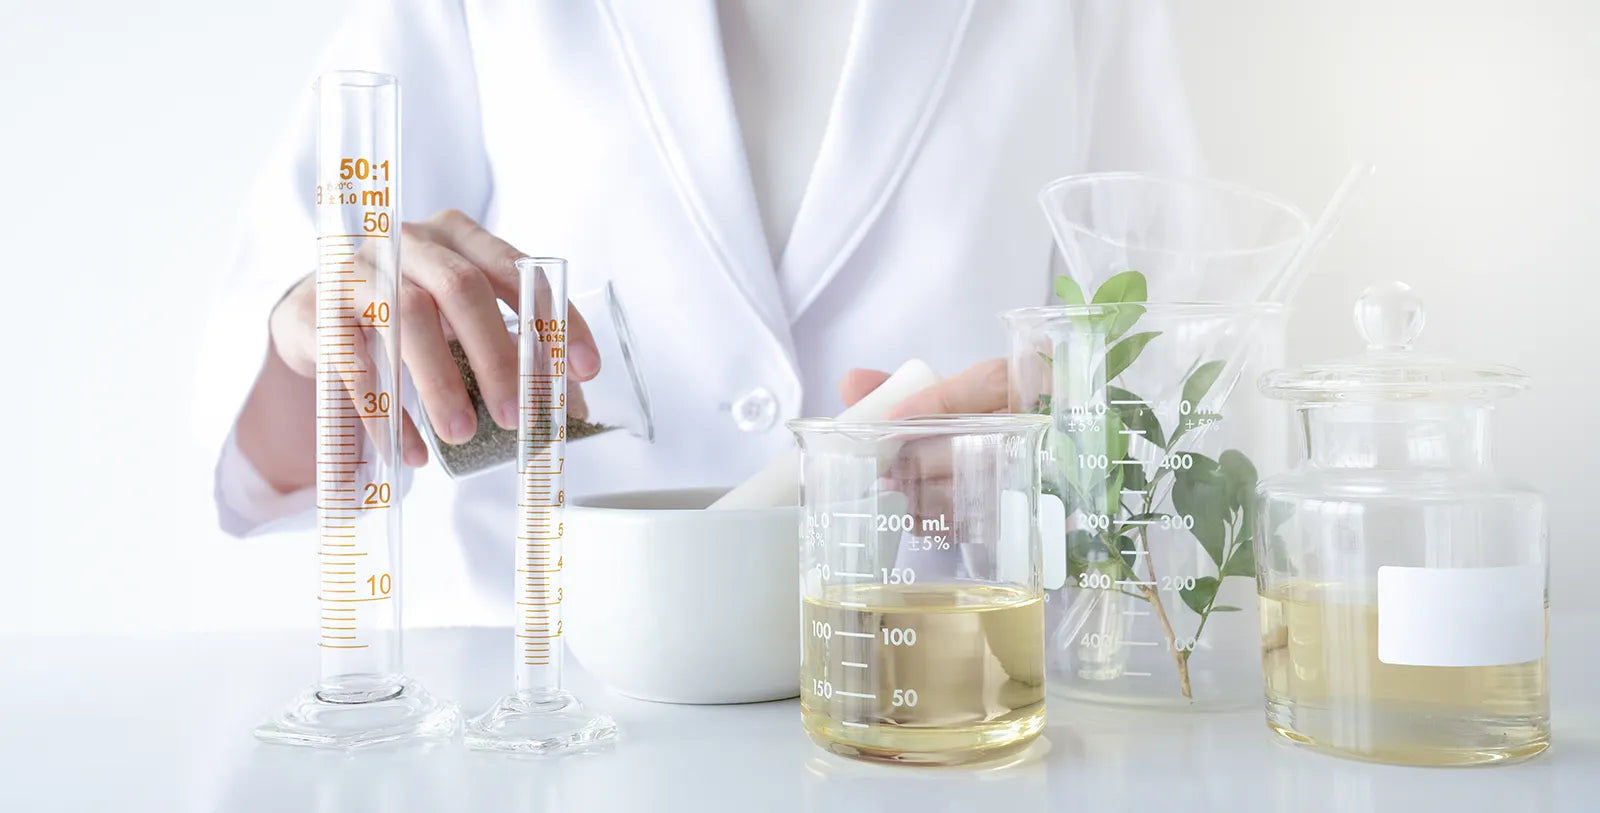 Stock photo of a natural skincare chemist